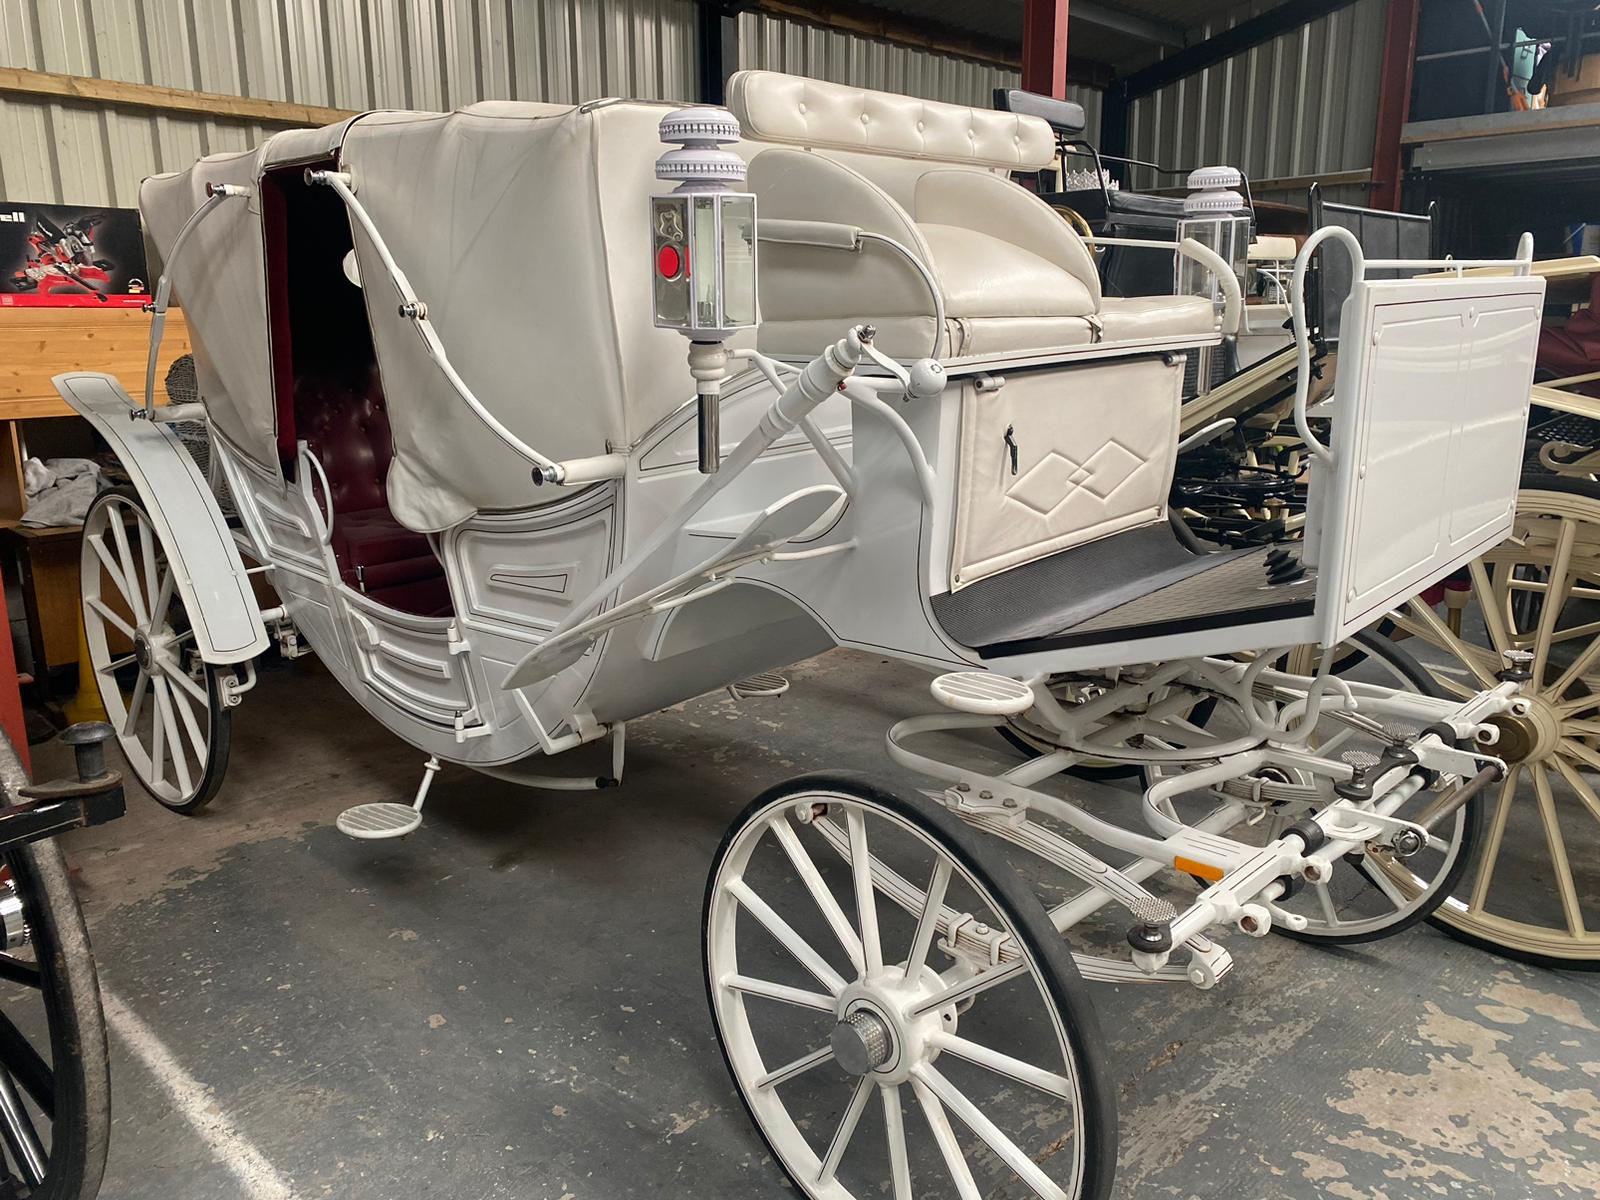 LANDAU built in Poland to suit 14.2hh pair. Painted white with black lining, white hoods, and red